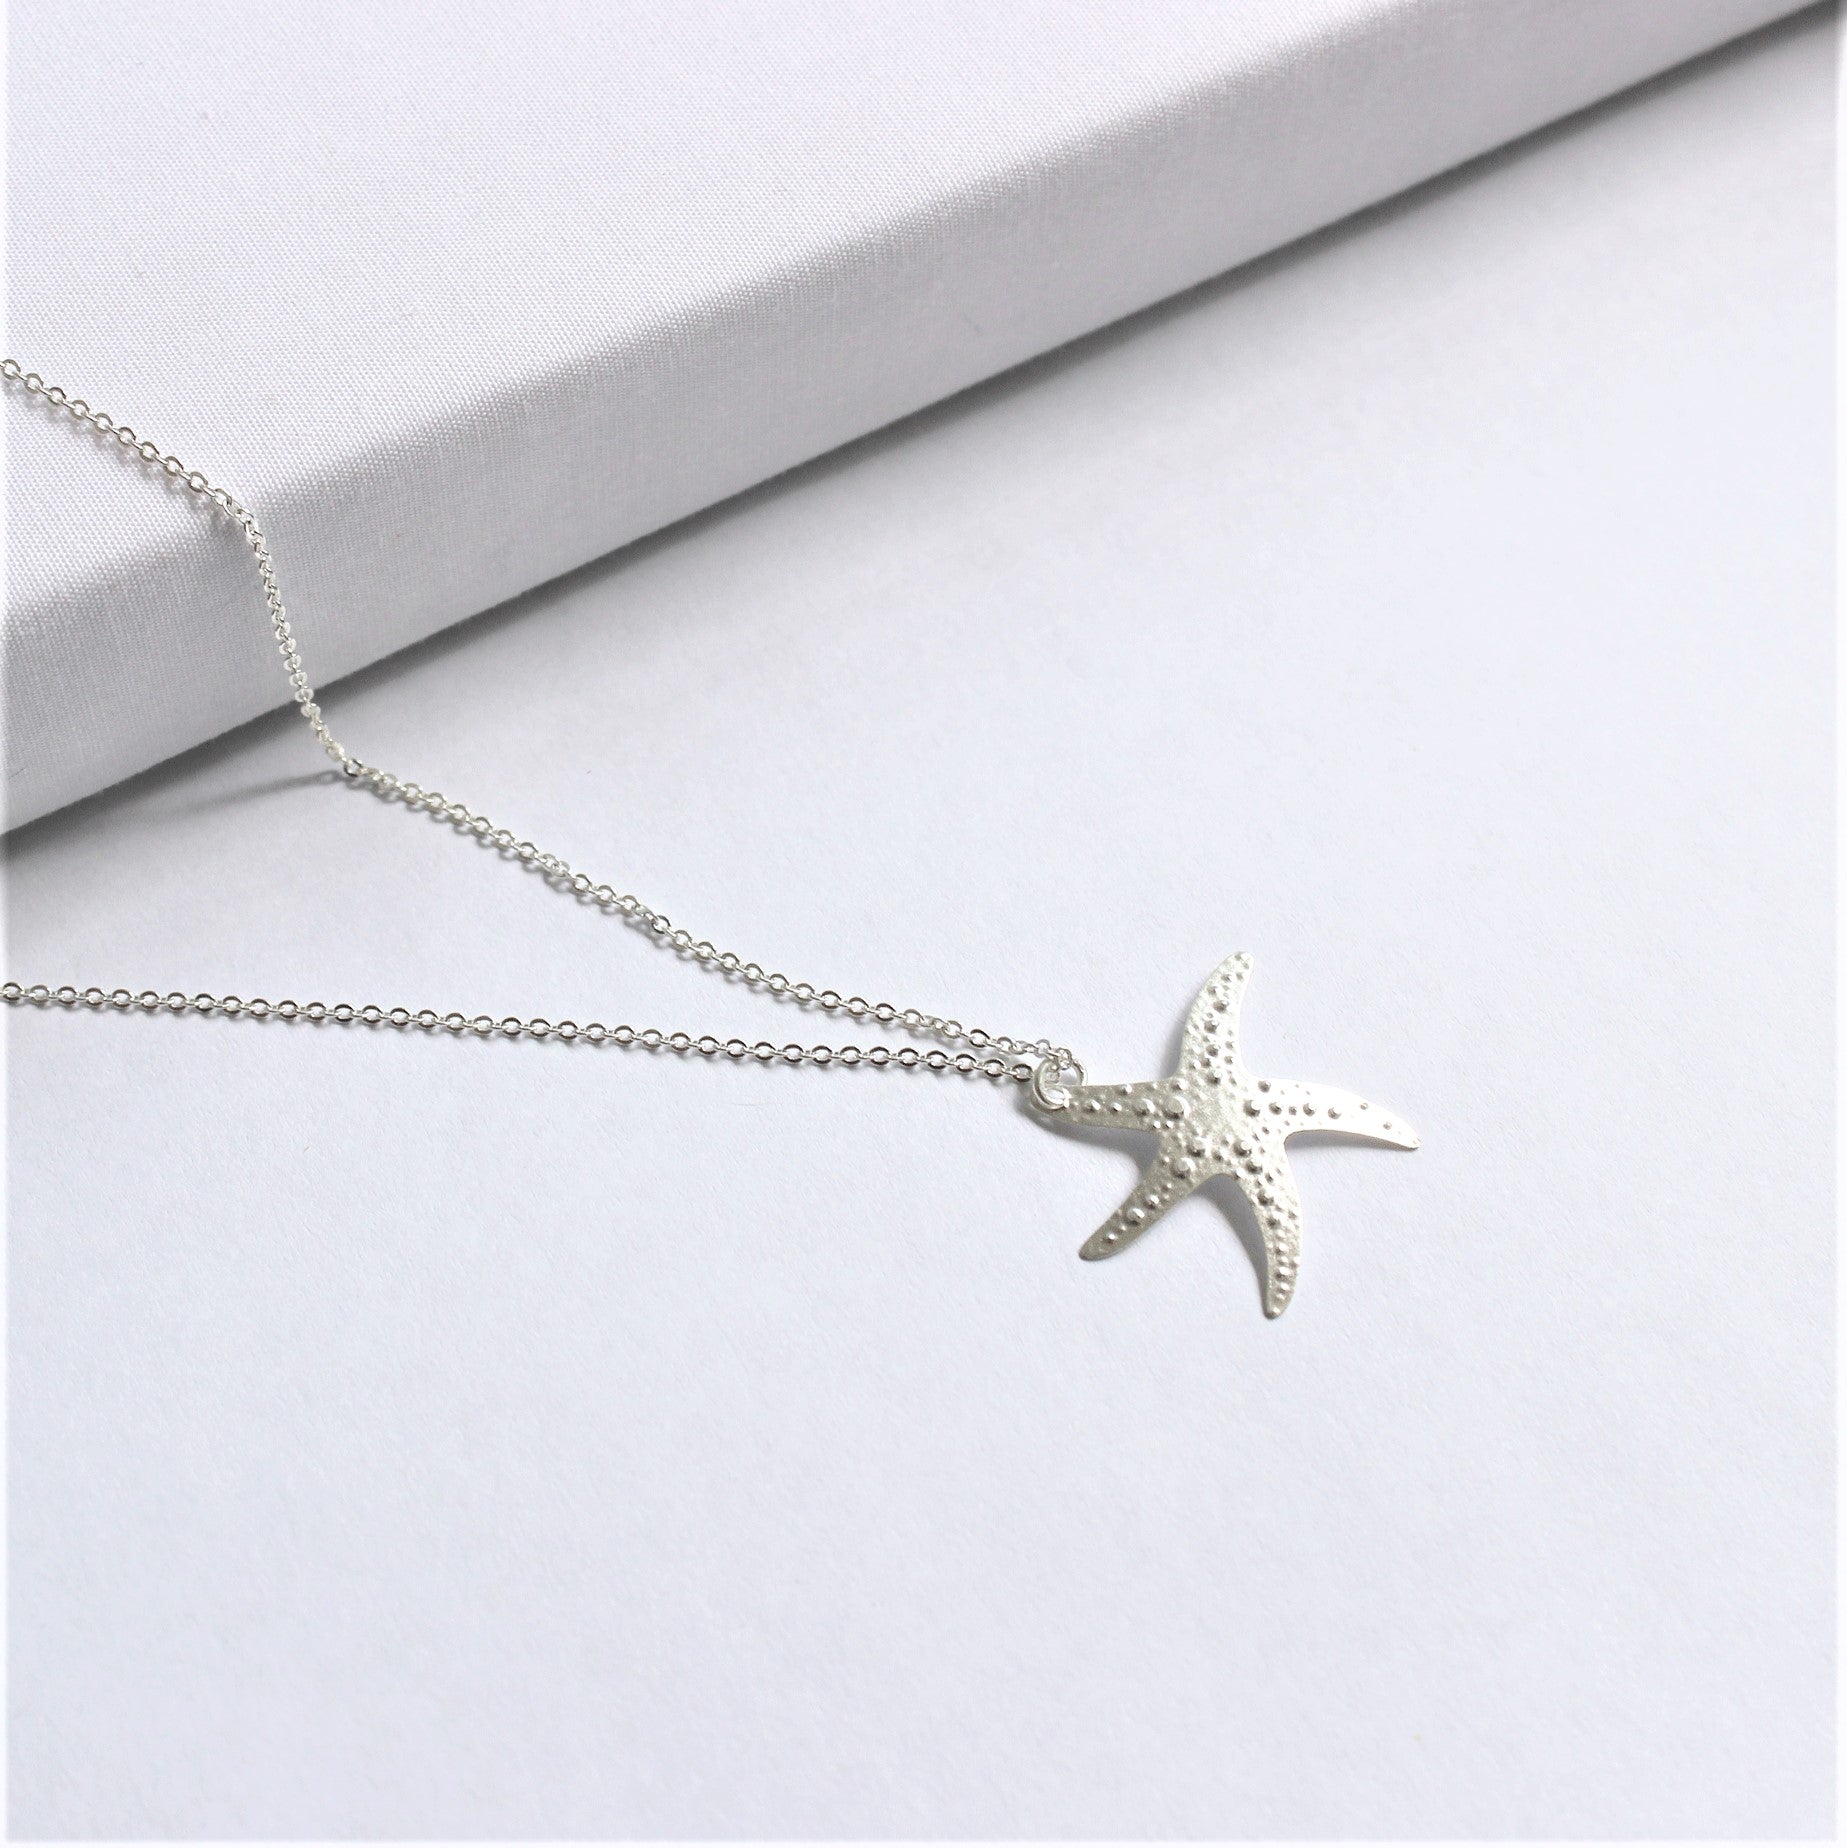 Dancing Starfish Necklace